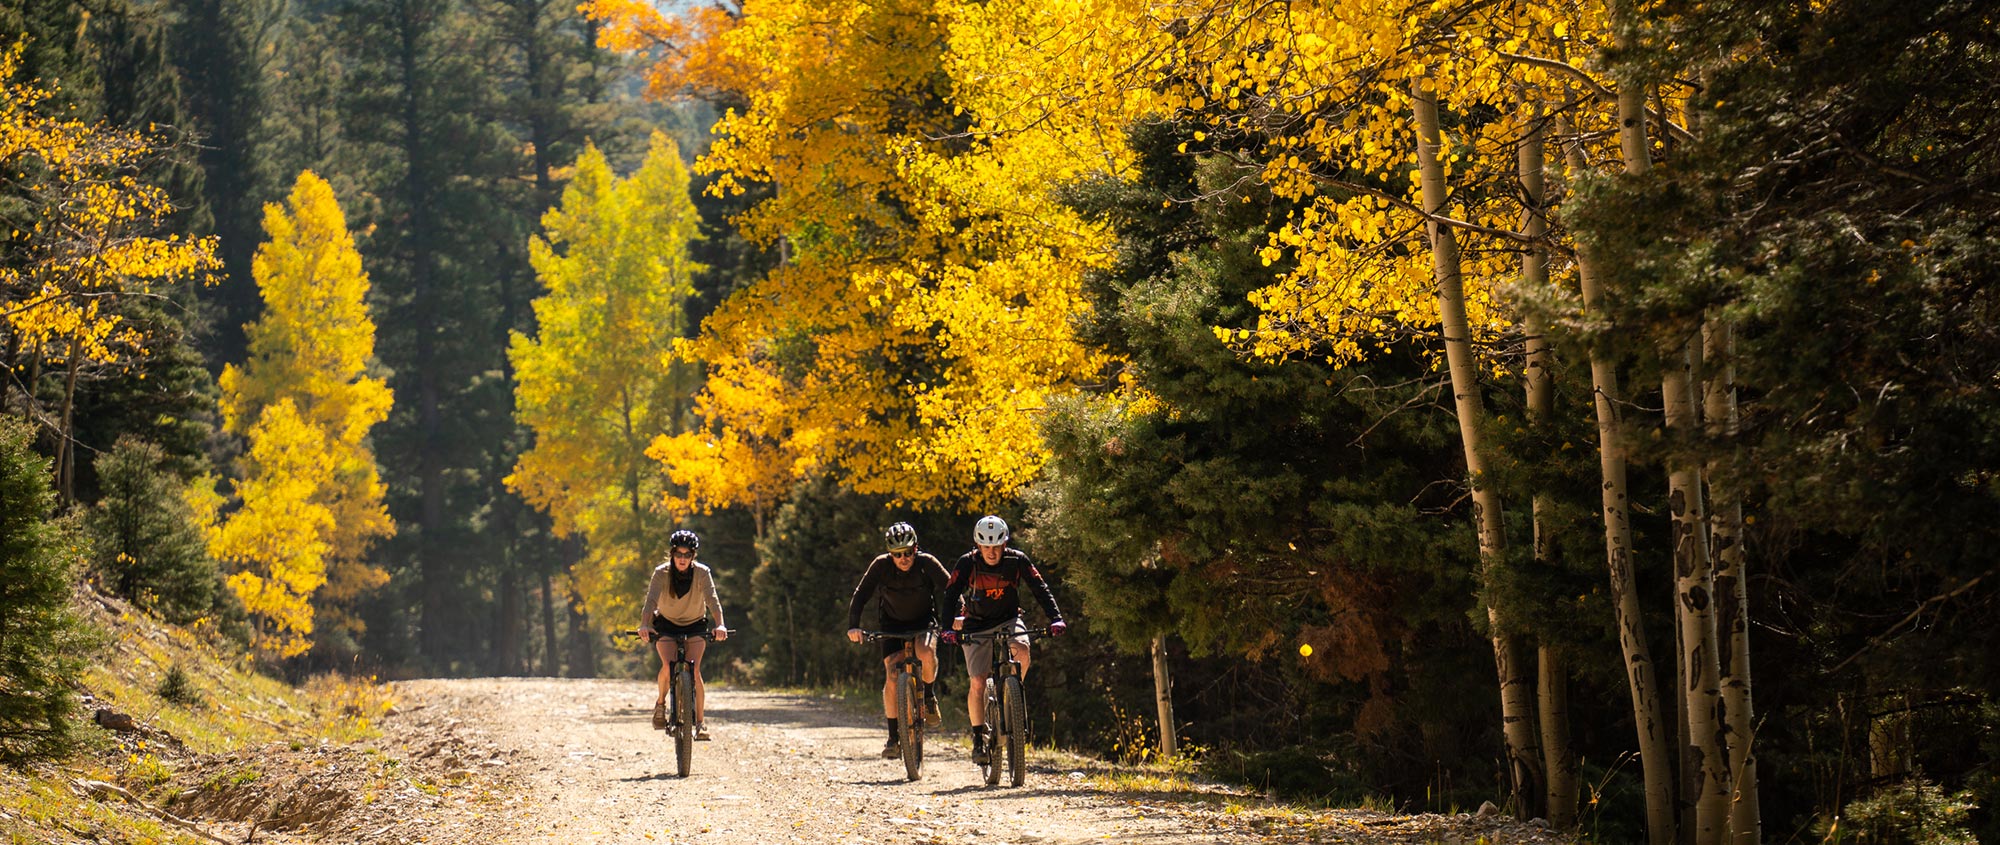 Mountain bikers on graded forest road with Fall colors.